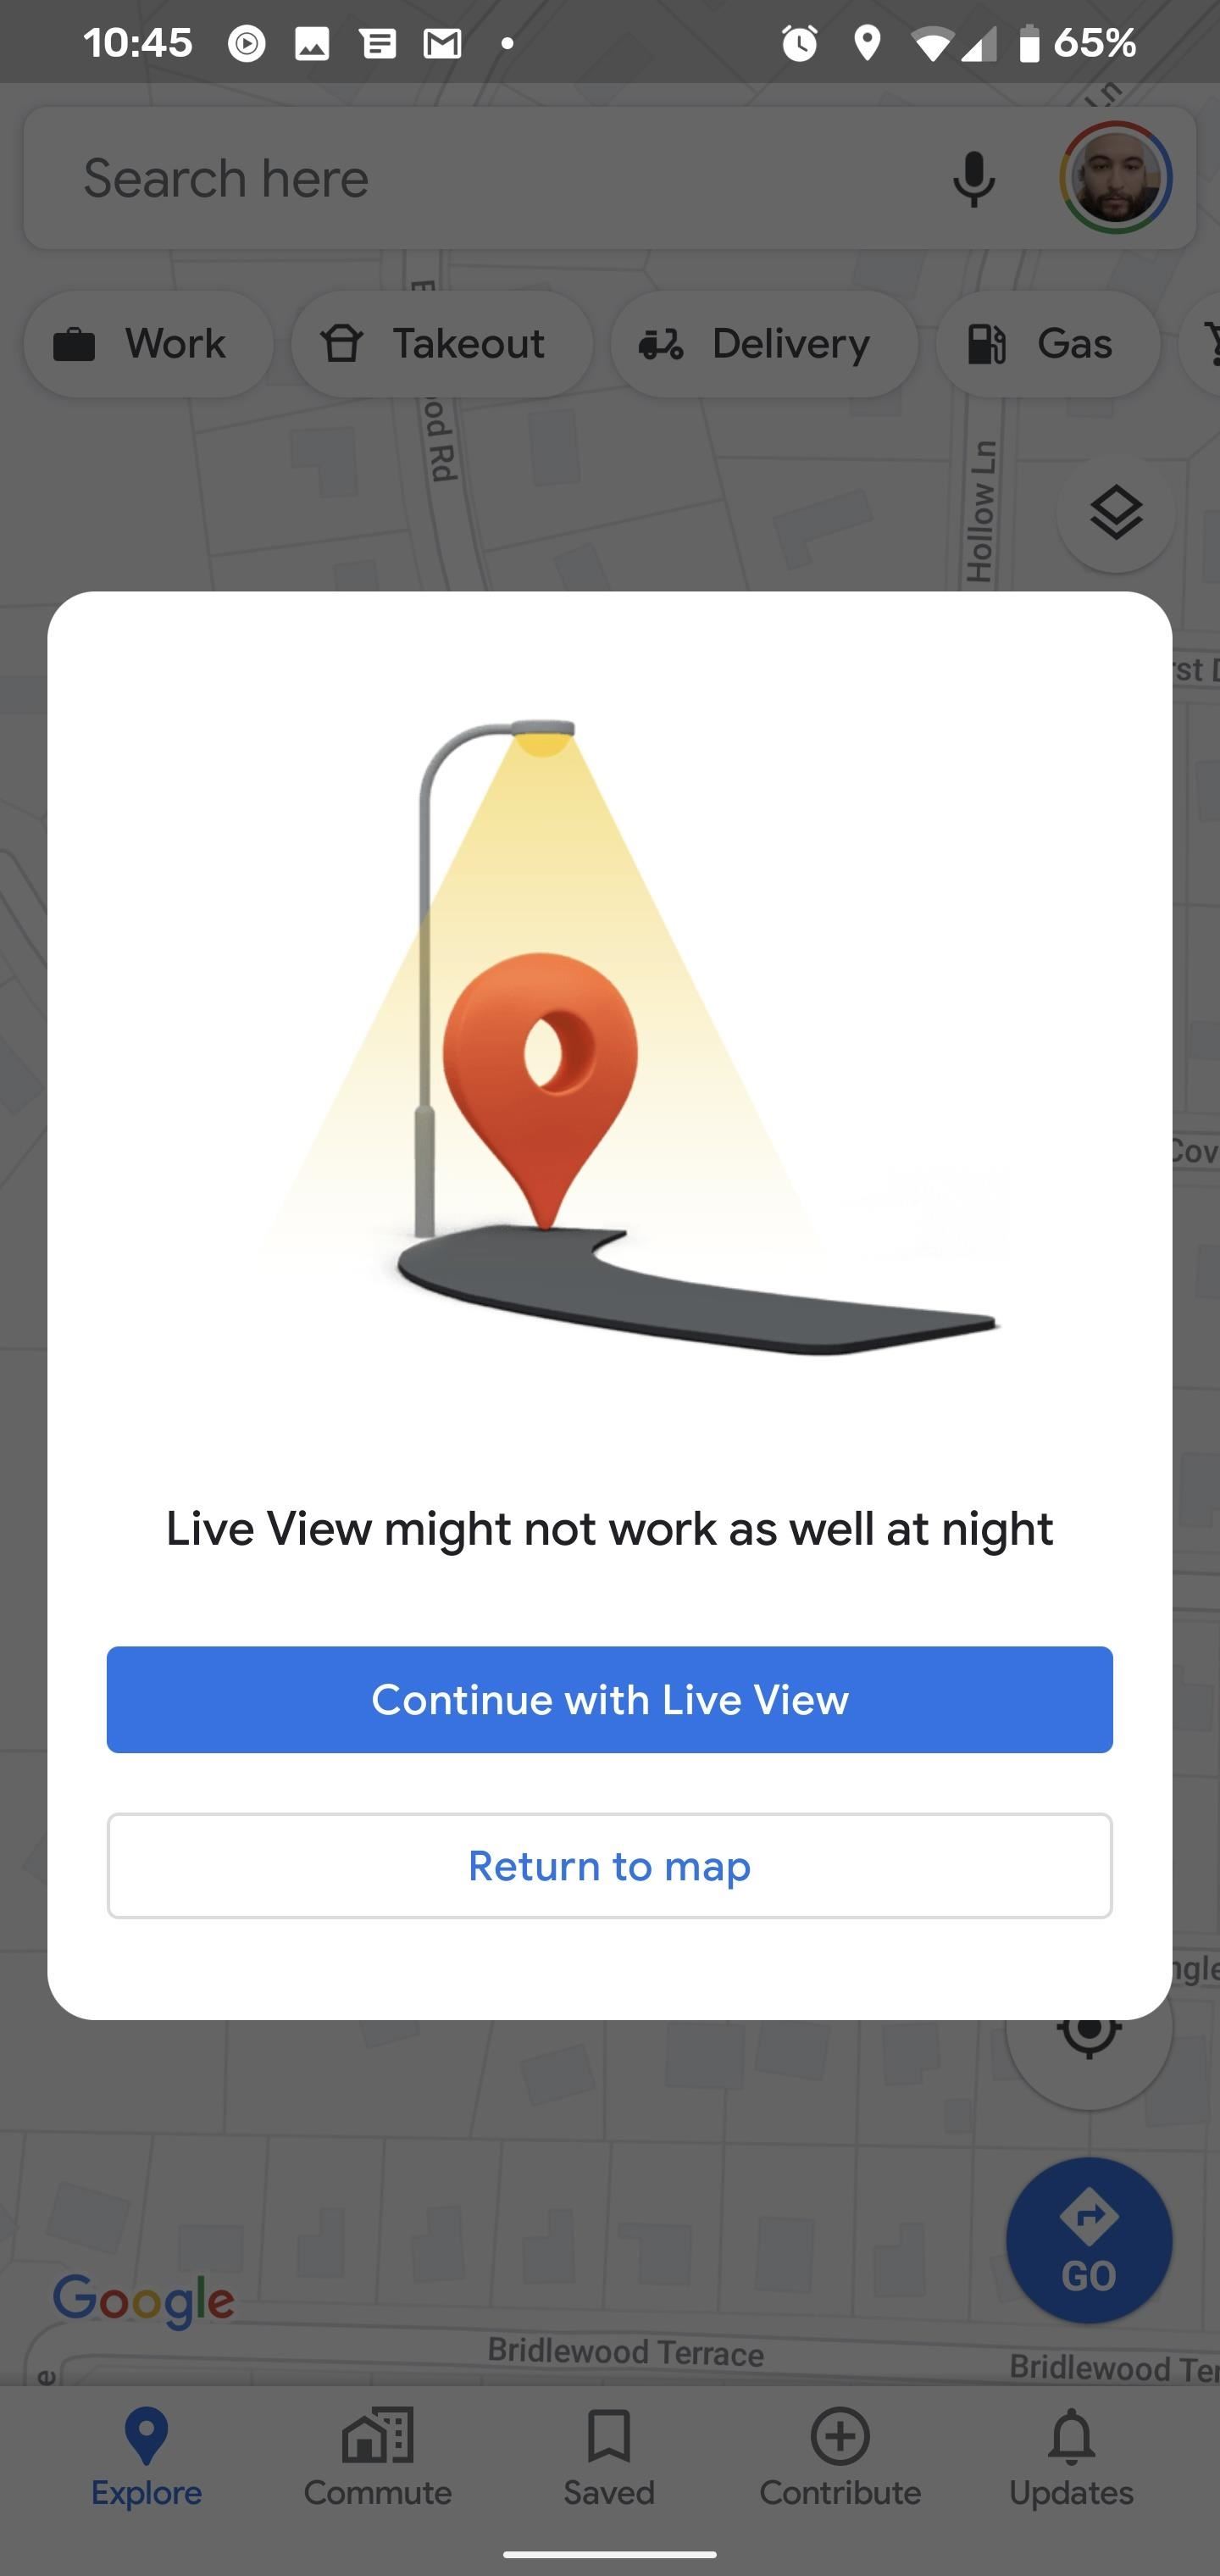 How to Scan Your Surroundings with Google Maps Live View to Calibrate Your Location